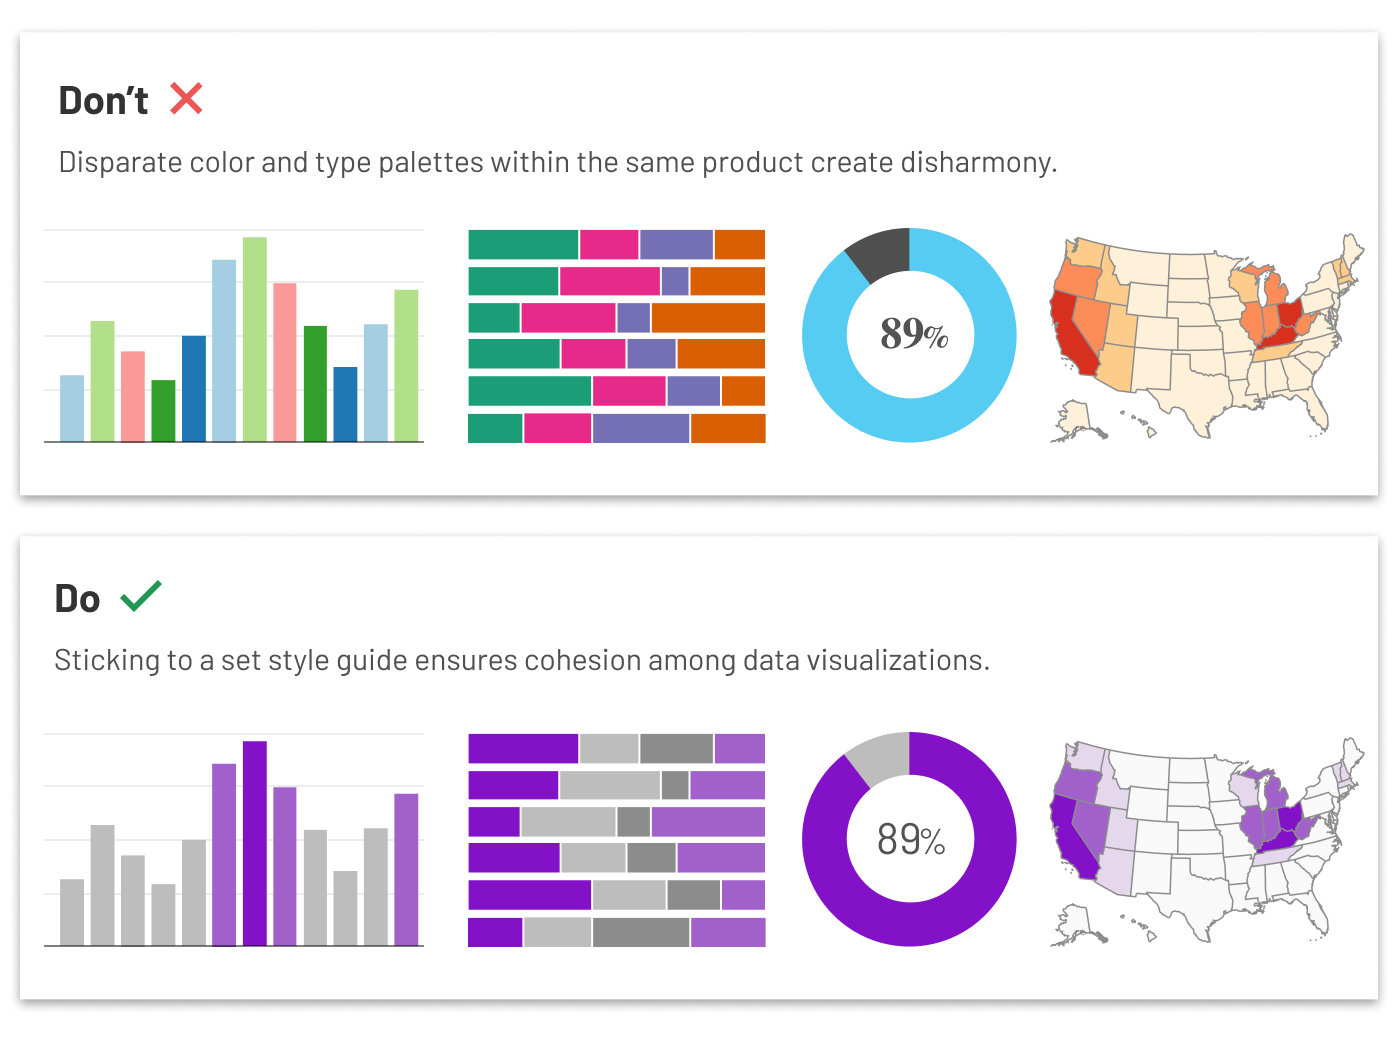 An image showing two sets of data visualizations, one with disparate color palettes and another with a cohesive one.